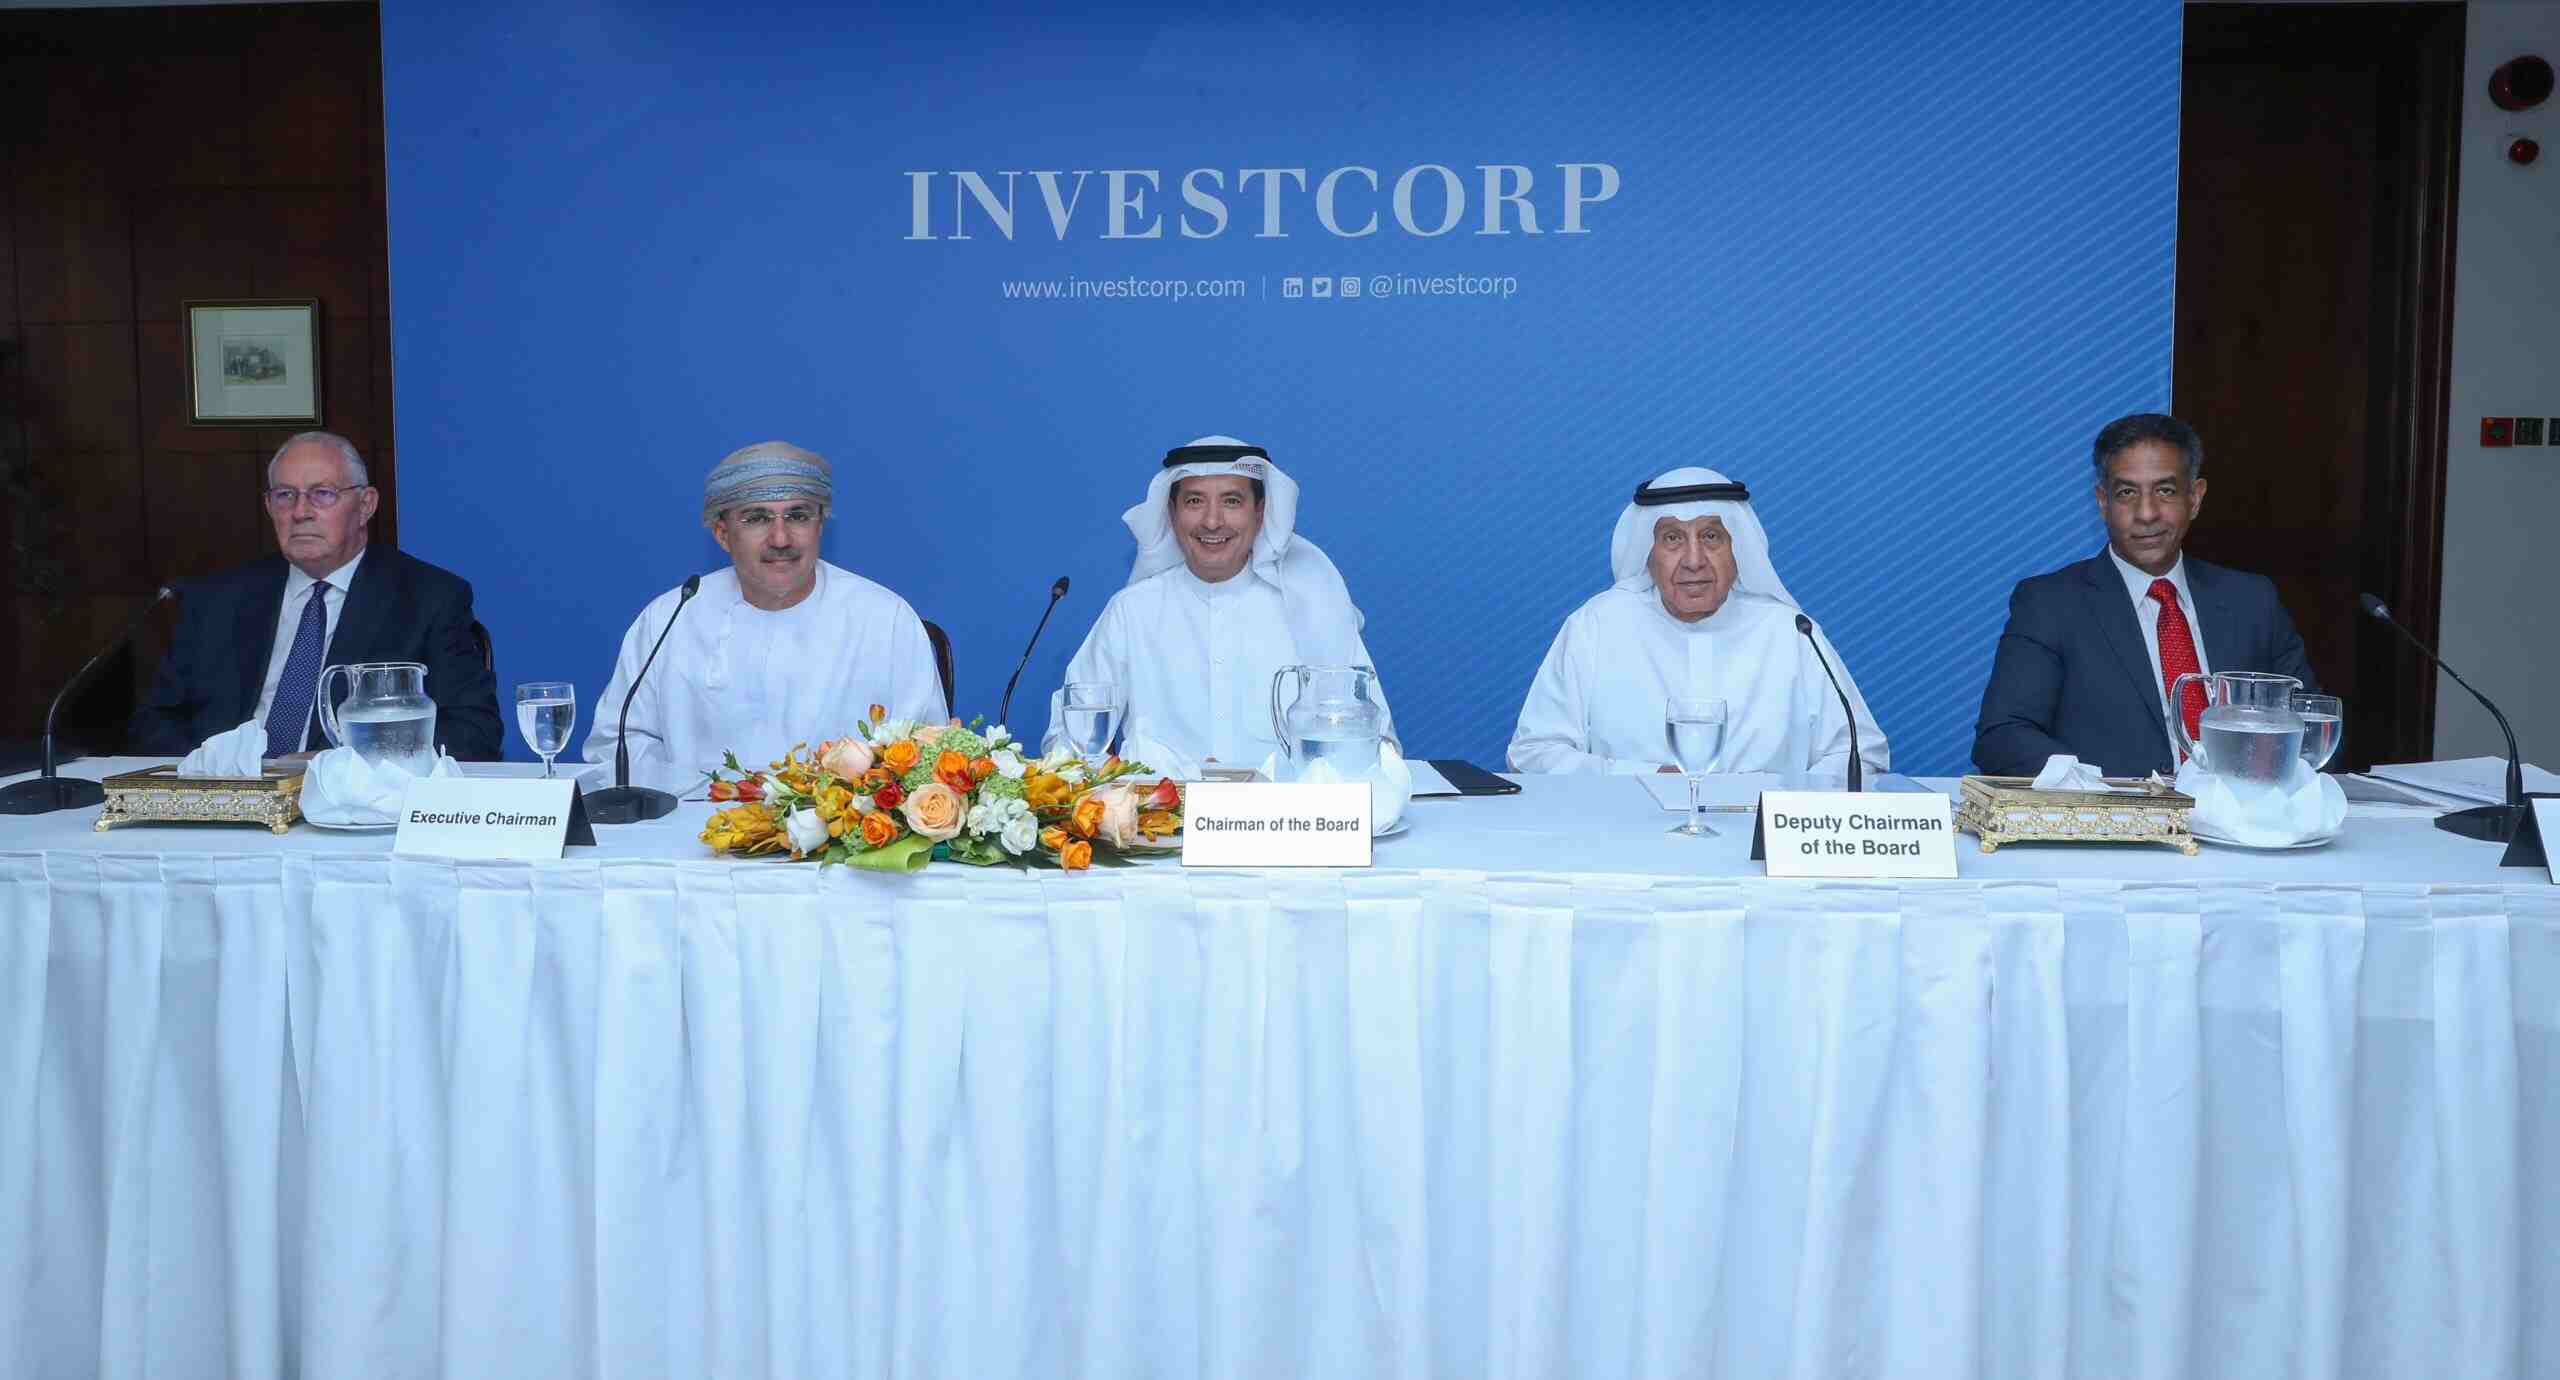 Investcorp Closes Technology Fund at $570 Million